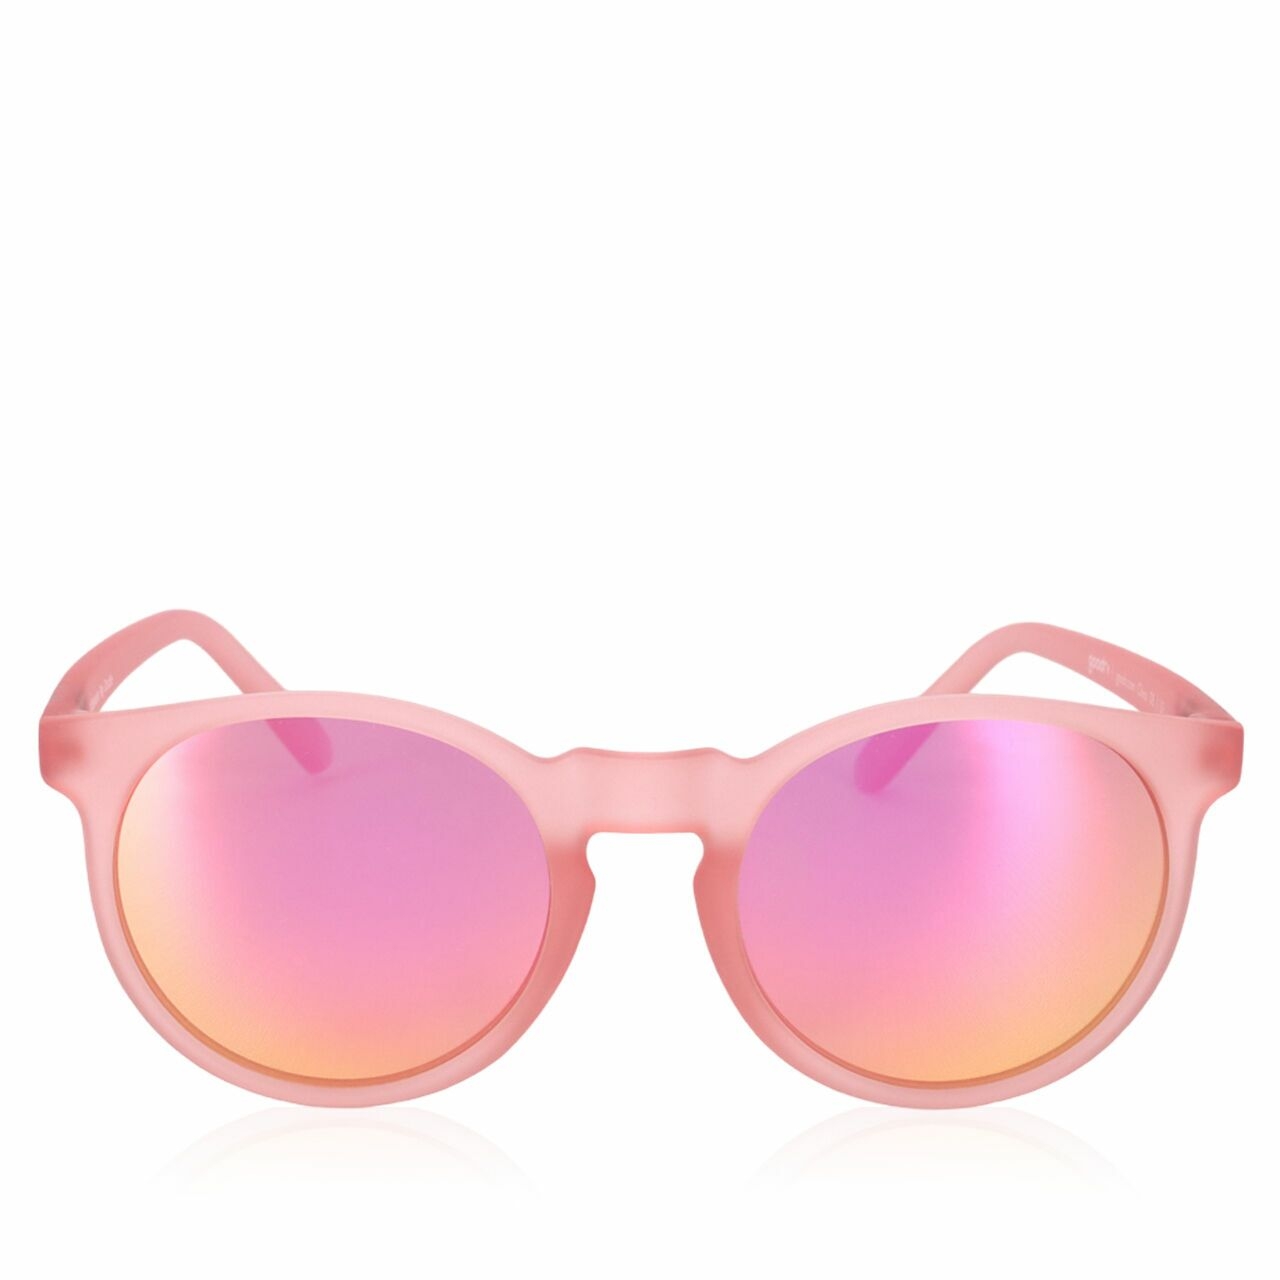 Goodr Influencers Pay Double Pink Sunglasses